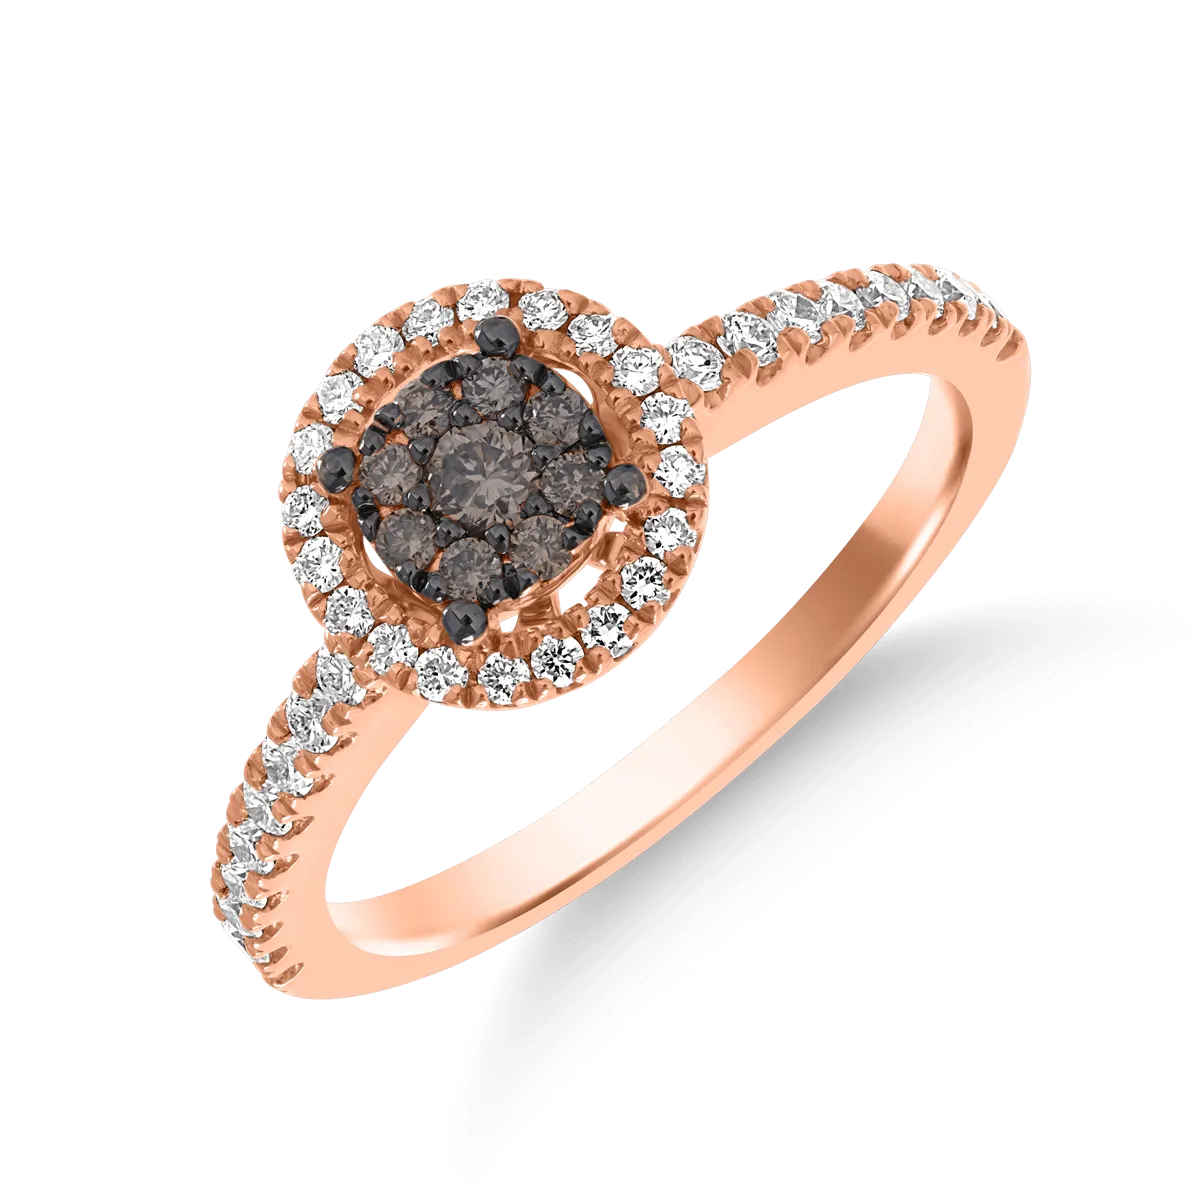 14K rose gold ring with 0.11ct brown diamonds and 0.26ct transparent diamonds